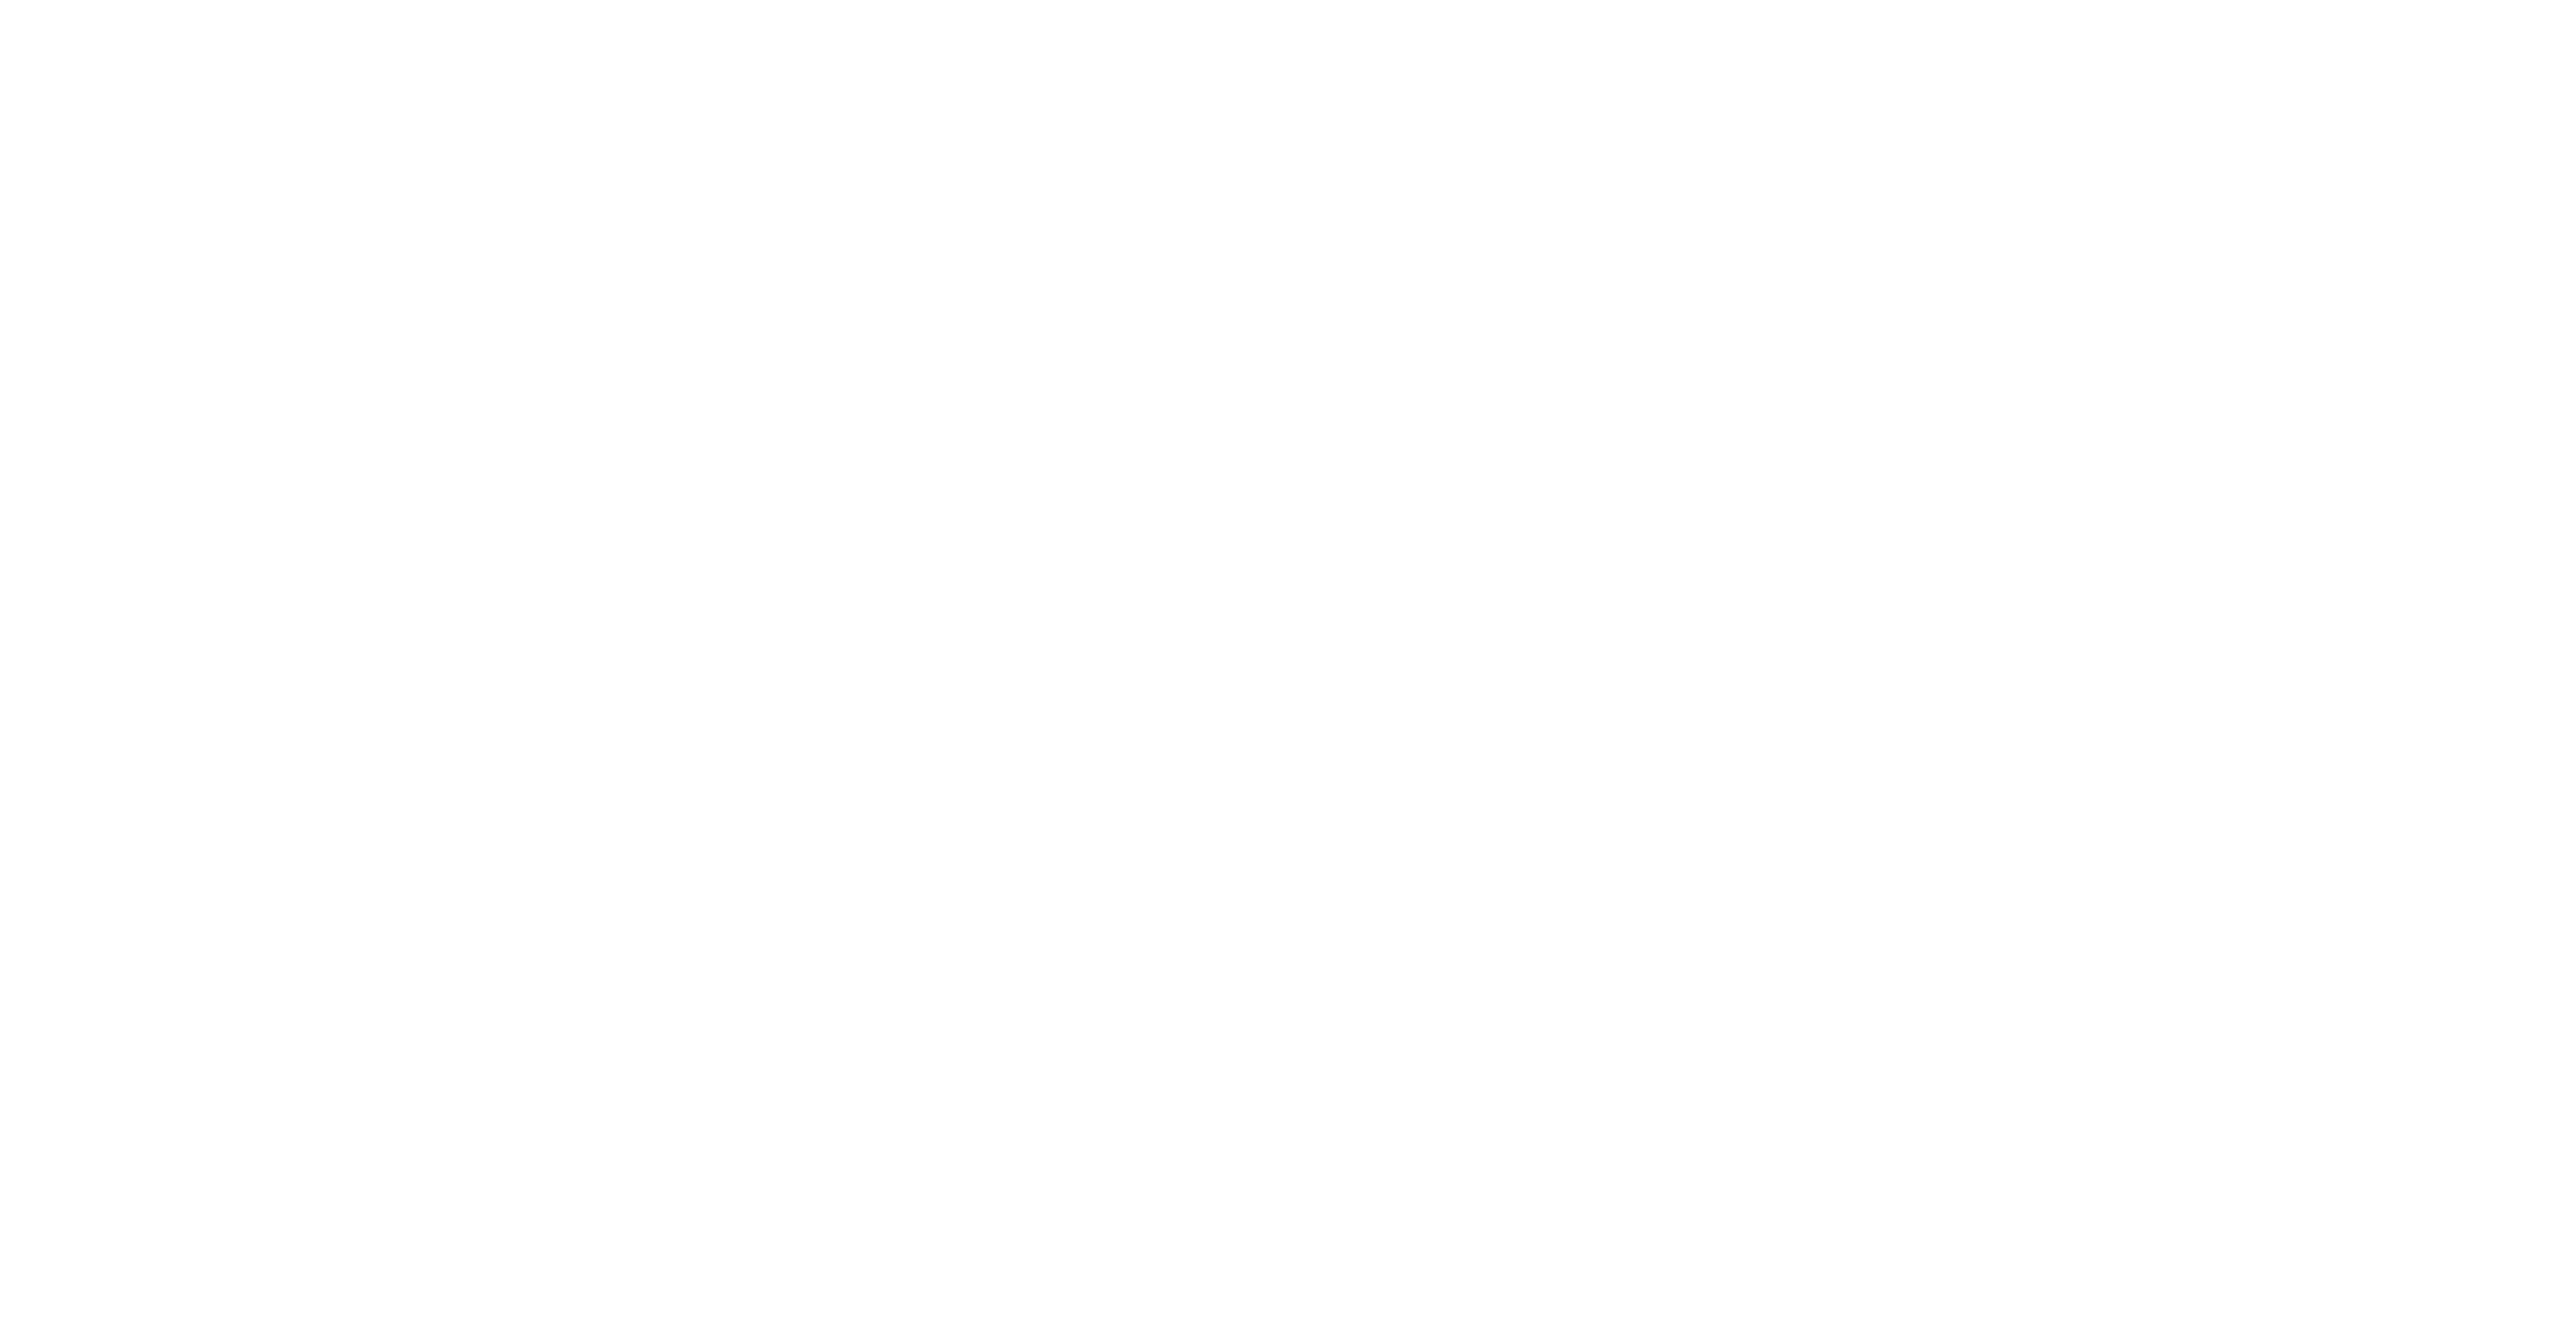 The Band Census